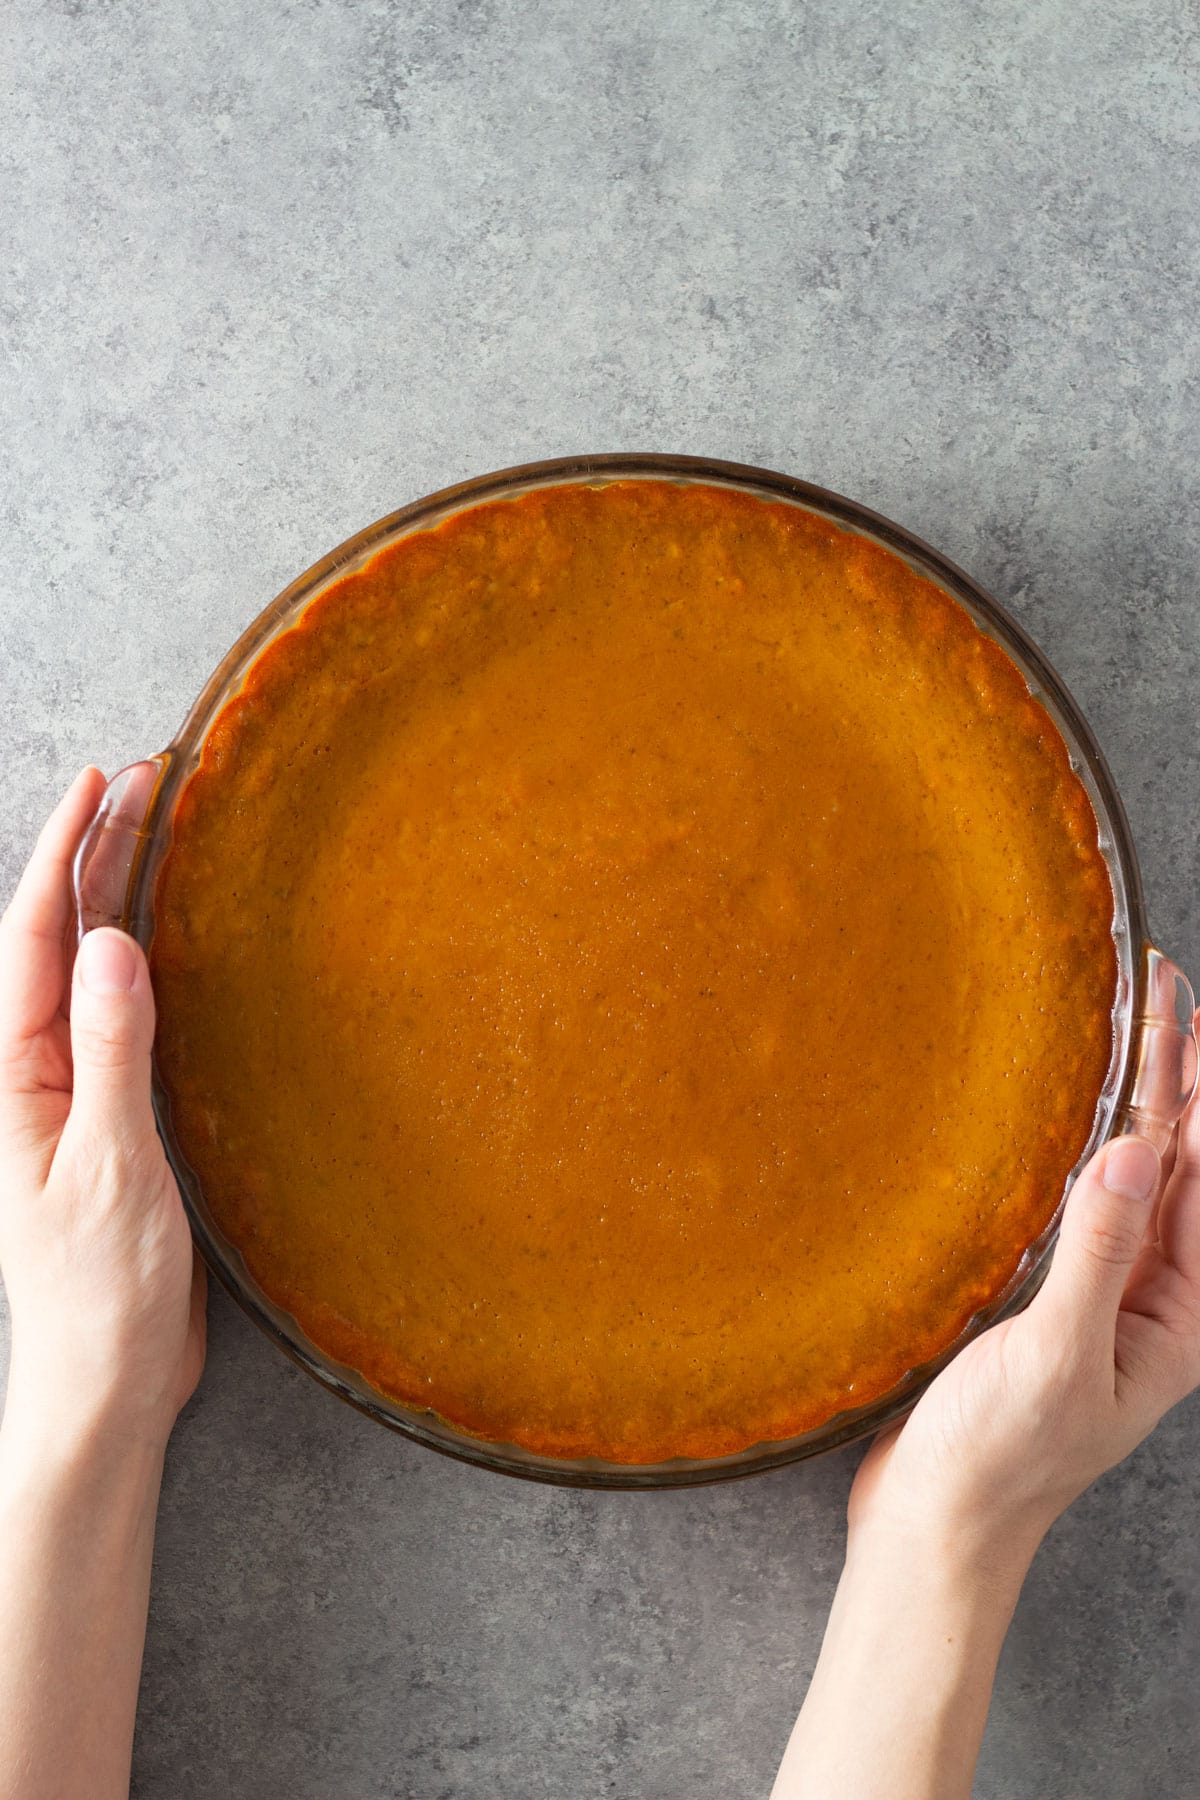 Overhead view of hands holding a pumpkin pie on a grey surface.